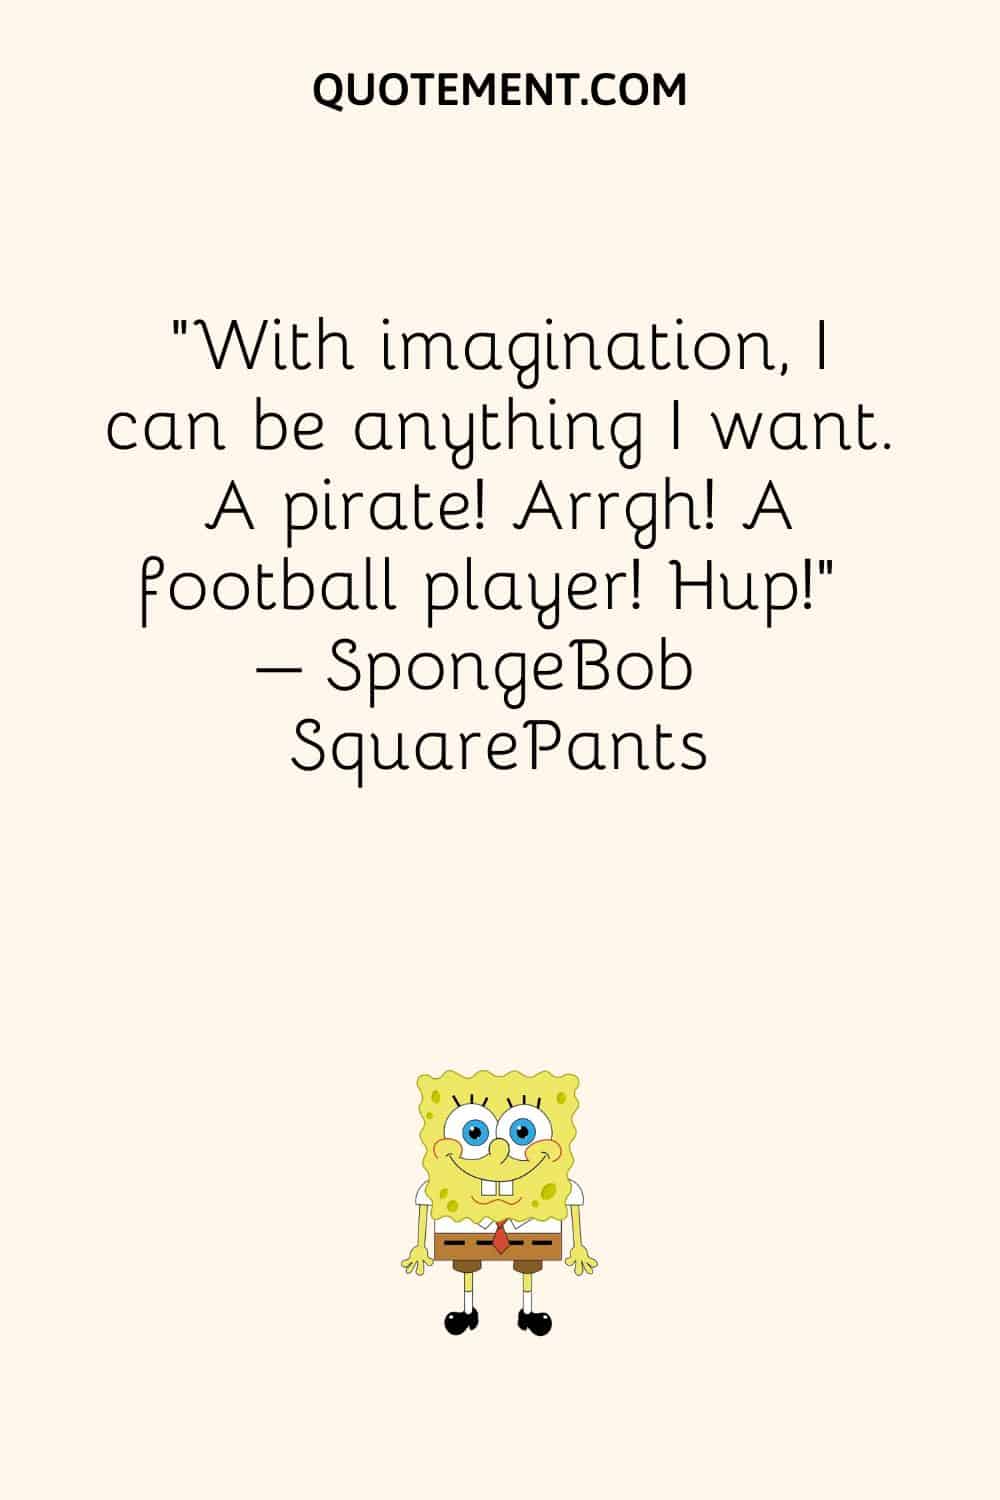 “With imagination, I can be anything I want. A pirate! Arrgh! A football player! Hup!” – SpongeBob SquarePants